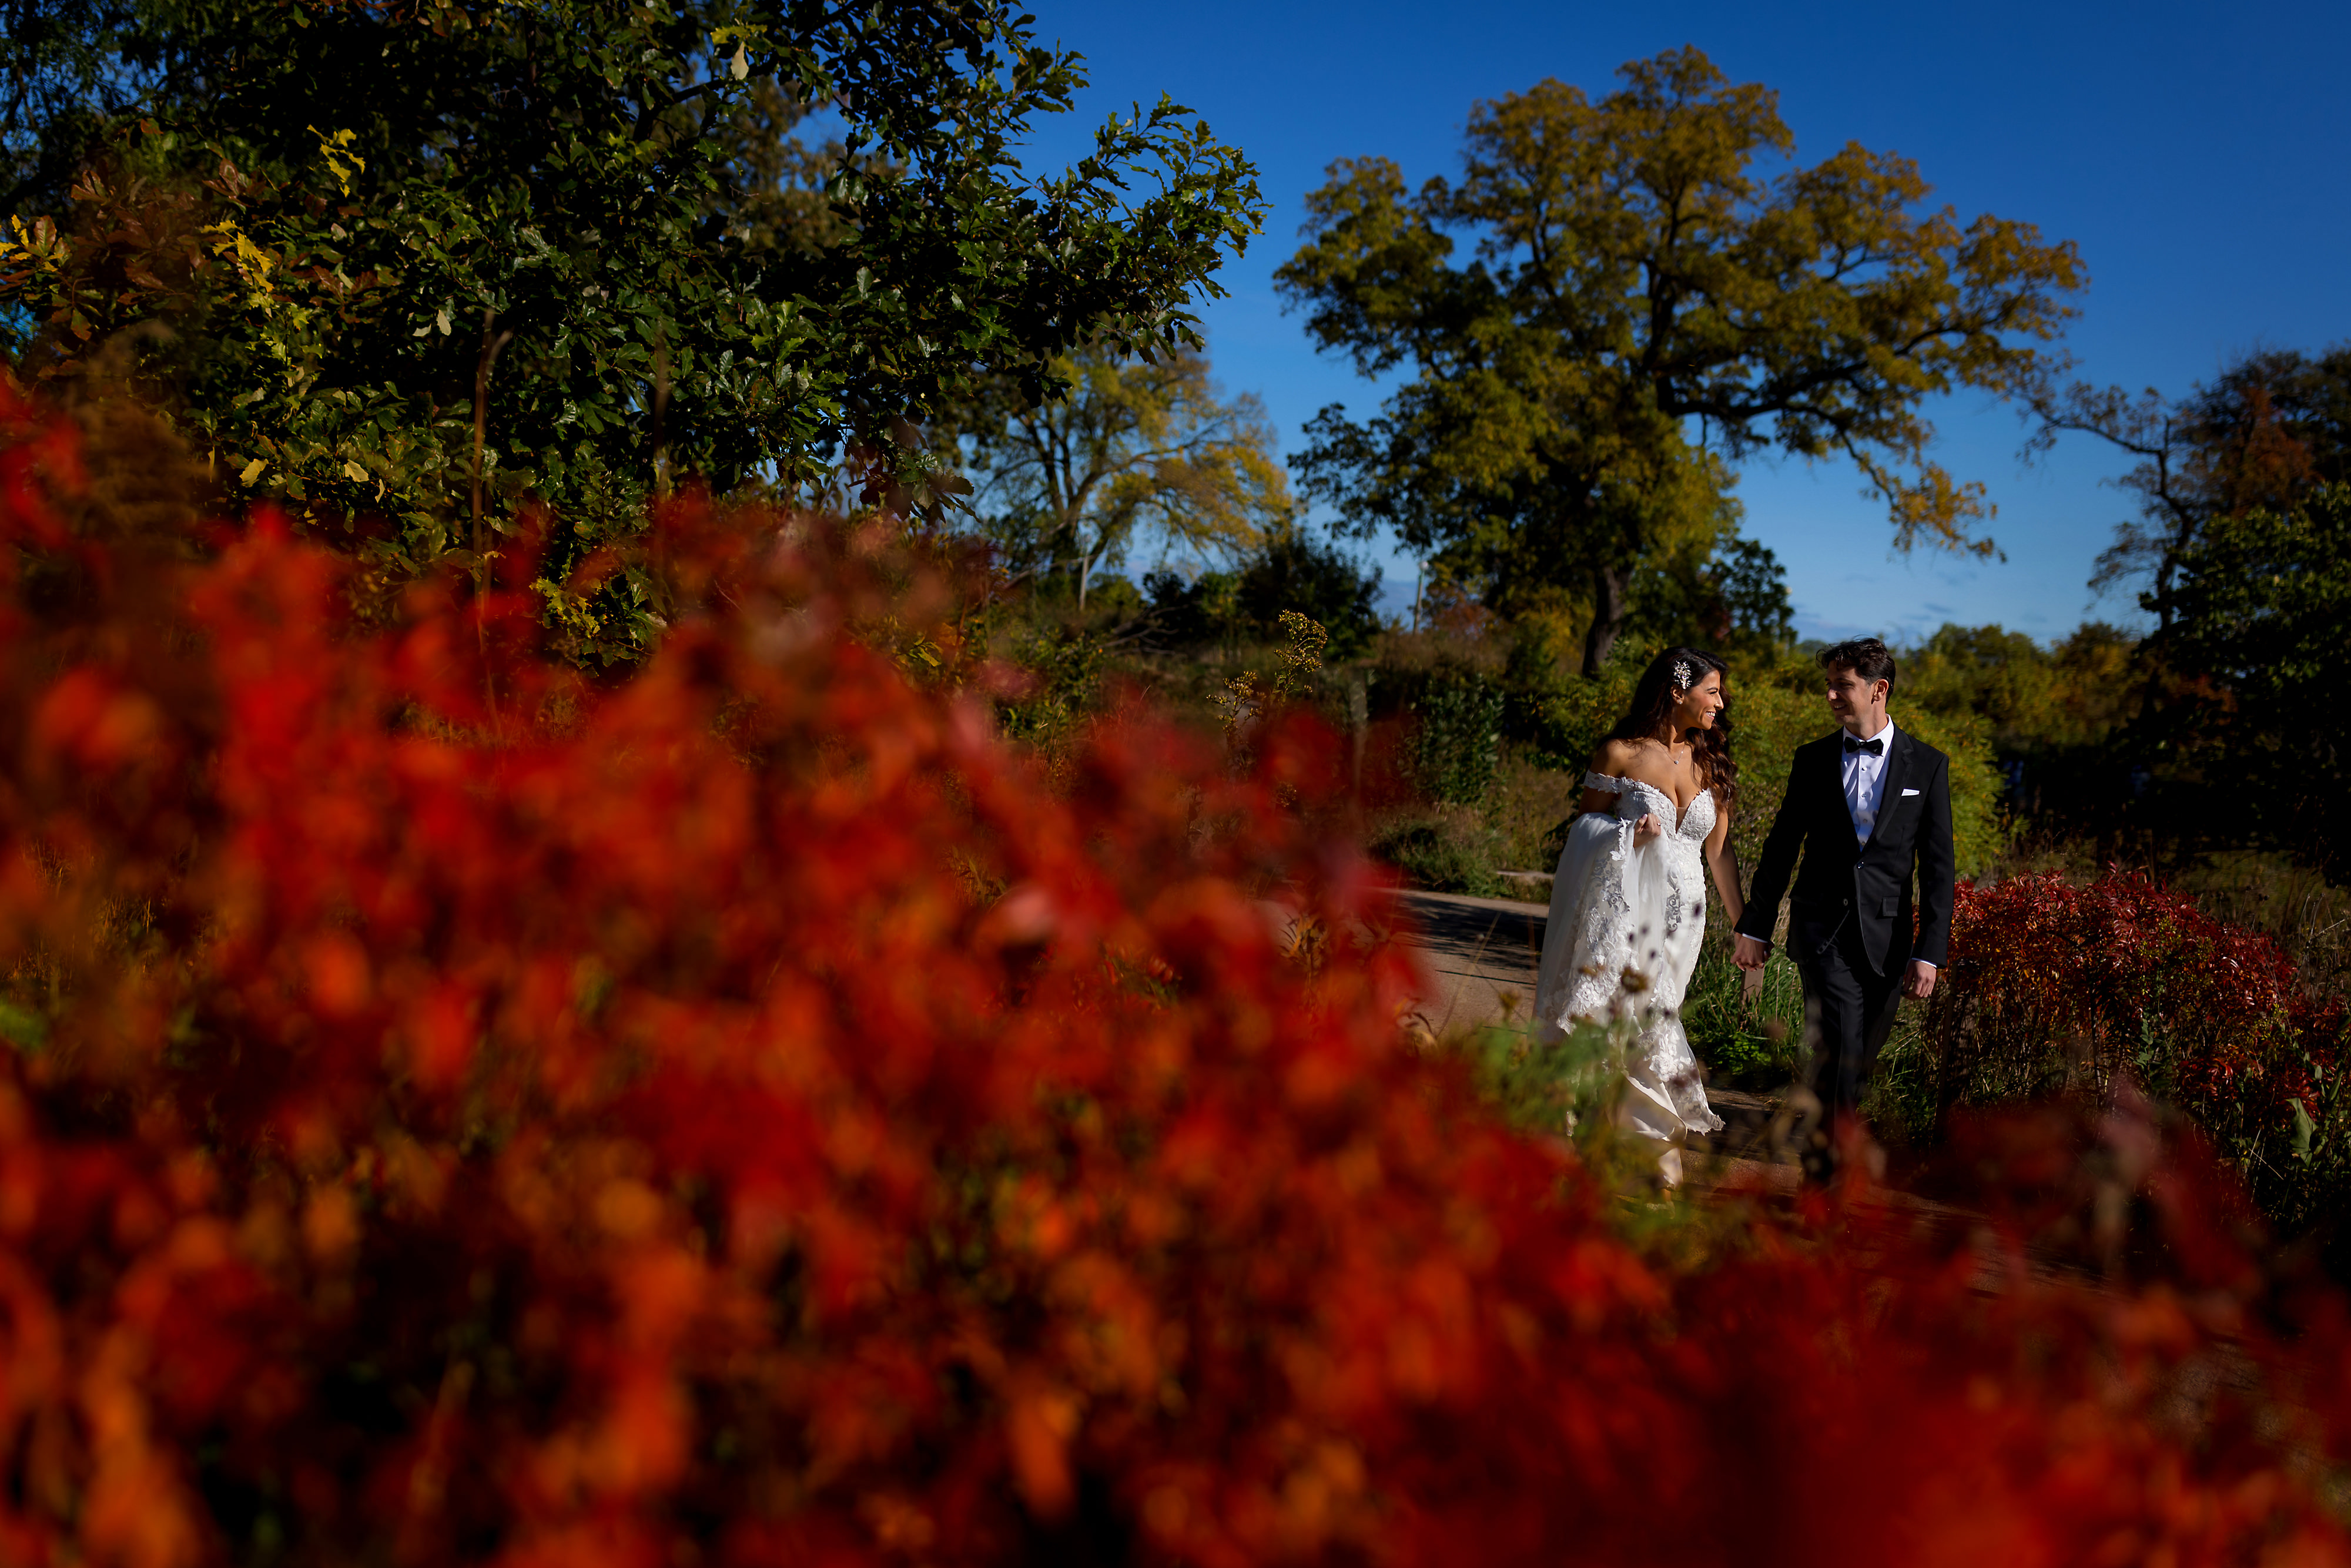 Bride and groom walk through Lincoln Park with red trees in the foreground